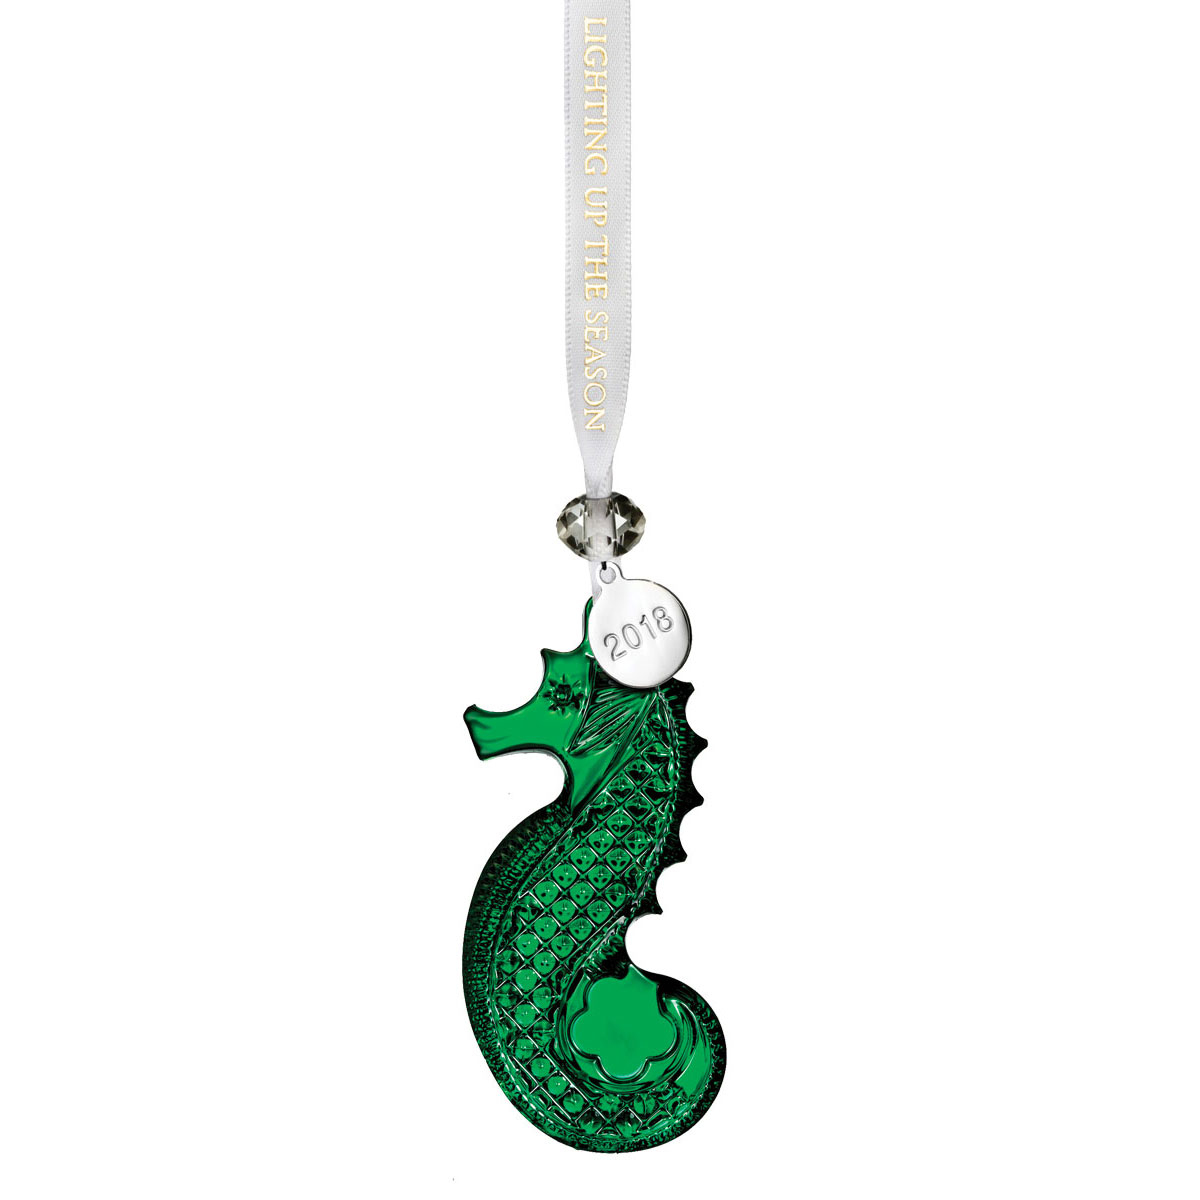 Waterford 2018 Seahorse Ornament, Green